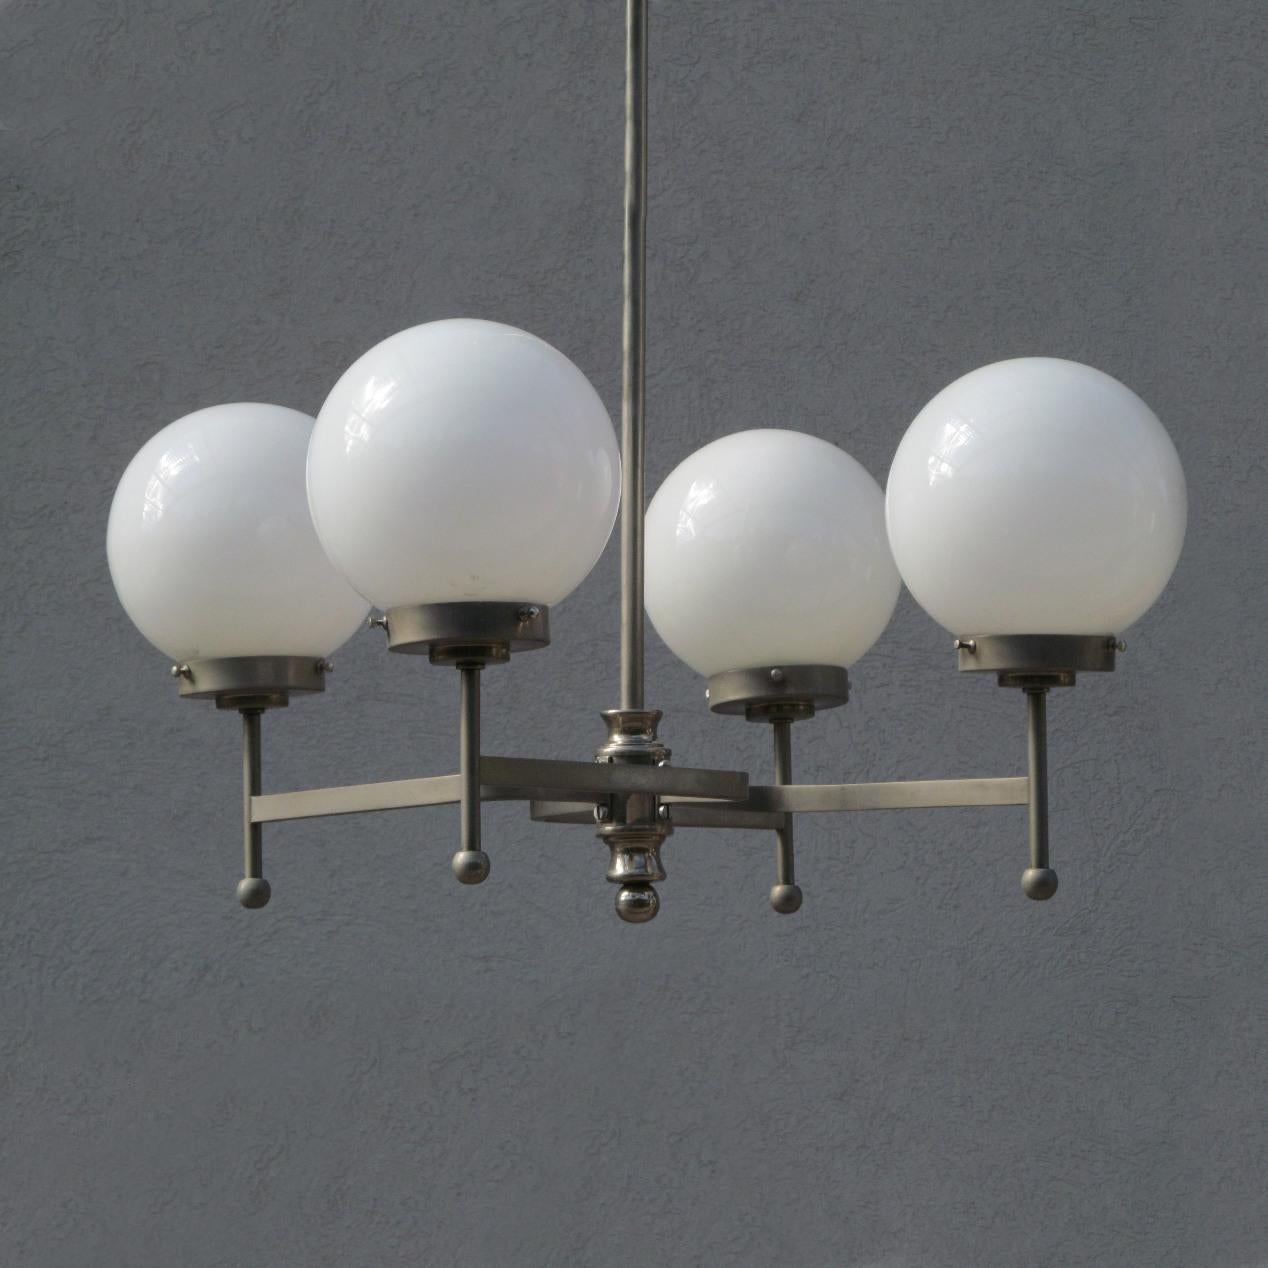 Early Bauhaus Four Opaline Sphere Lights Manji Shaped Chandelier, Germany, 1920s For Sale 1